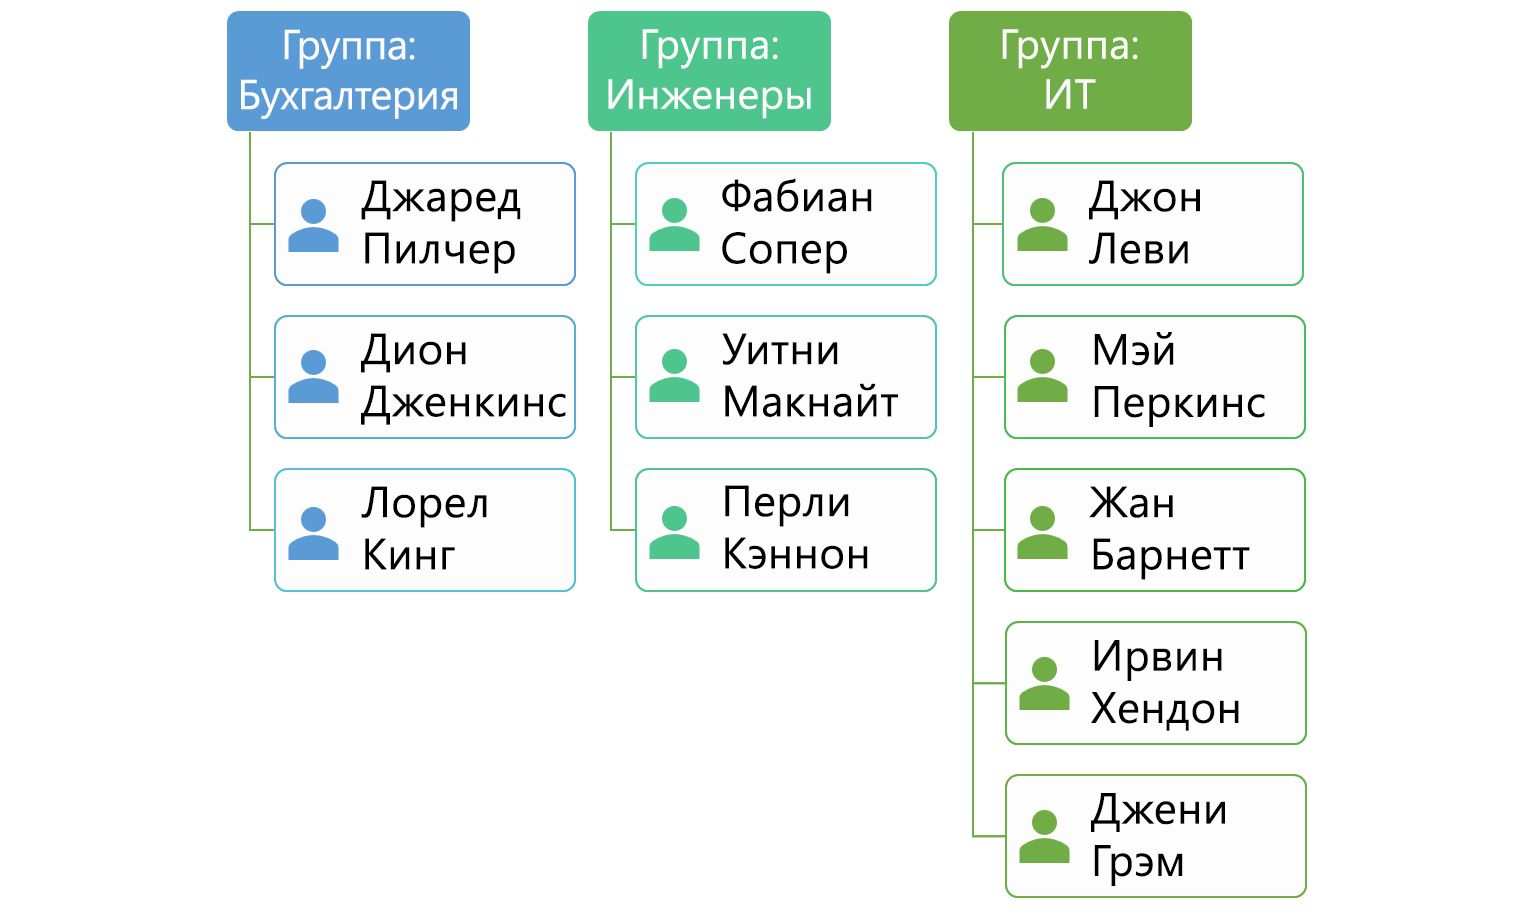 Figure 3.3: Users organized into departmental groups.